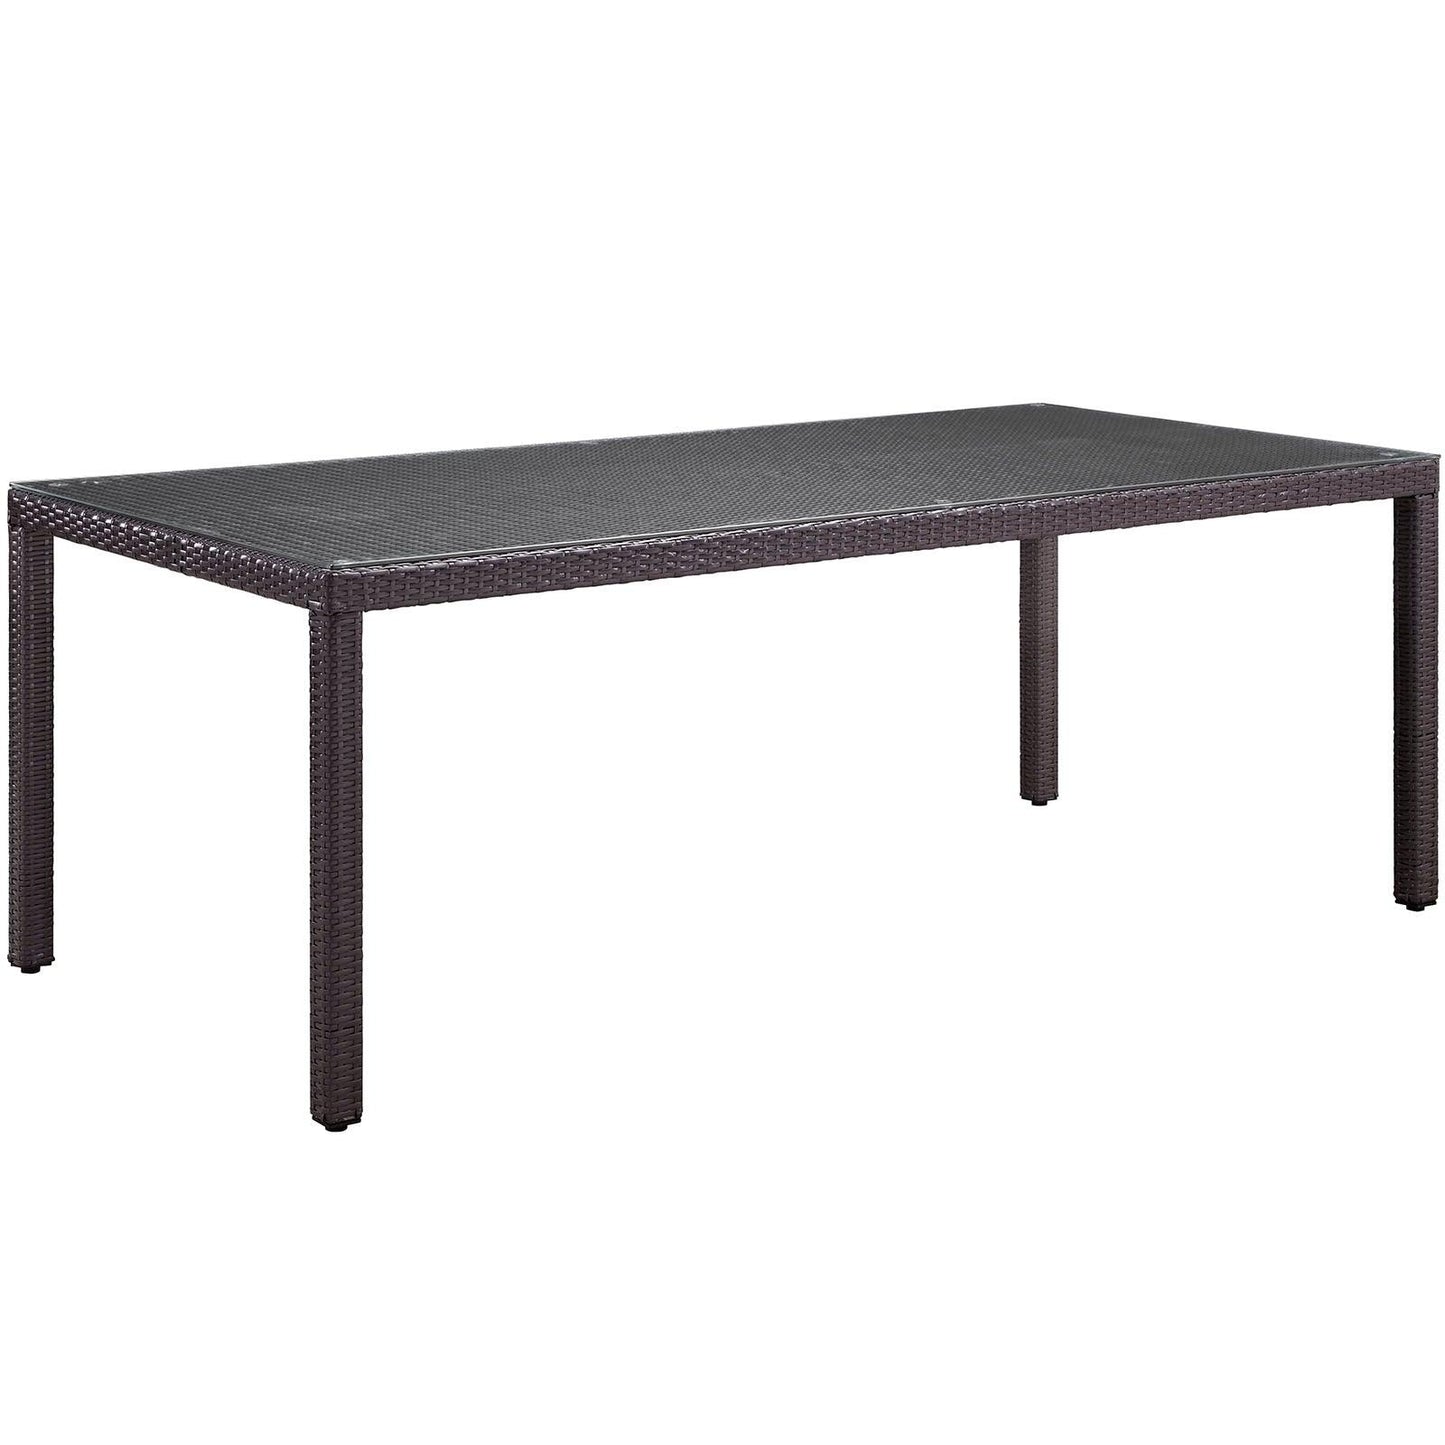 Modway Convene 82" Outdoor Patio Dining Table FredCo